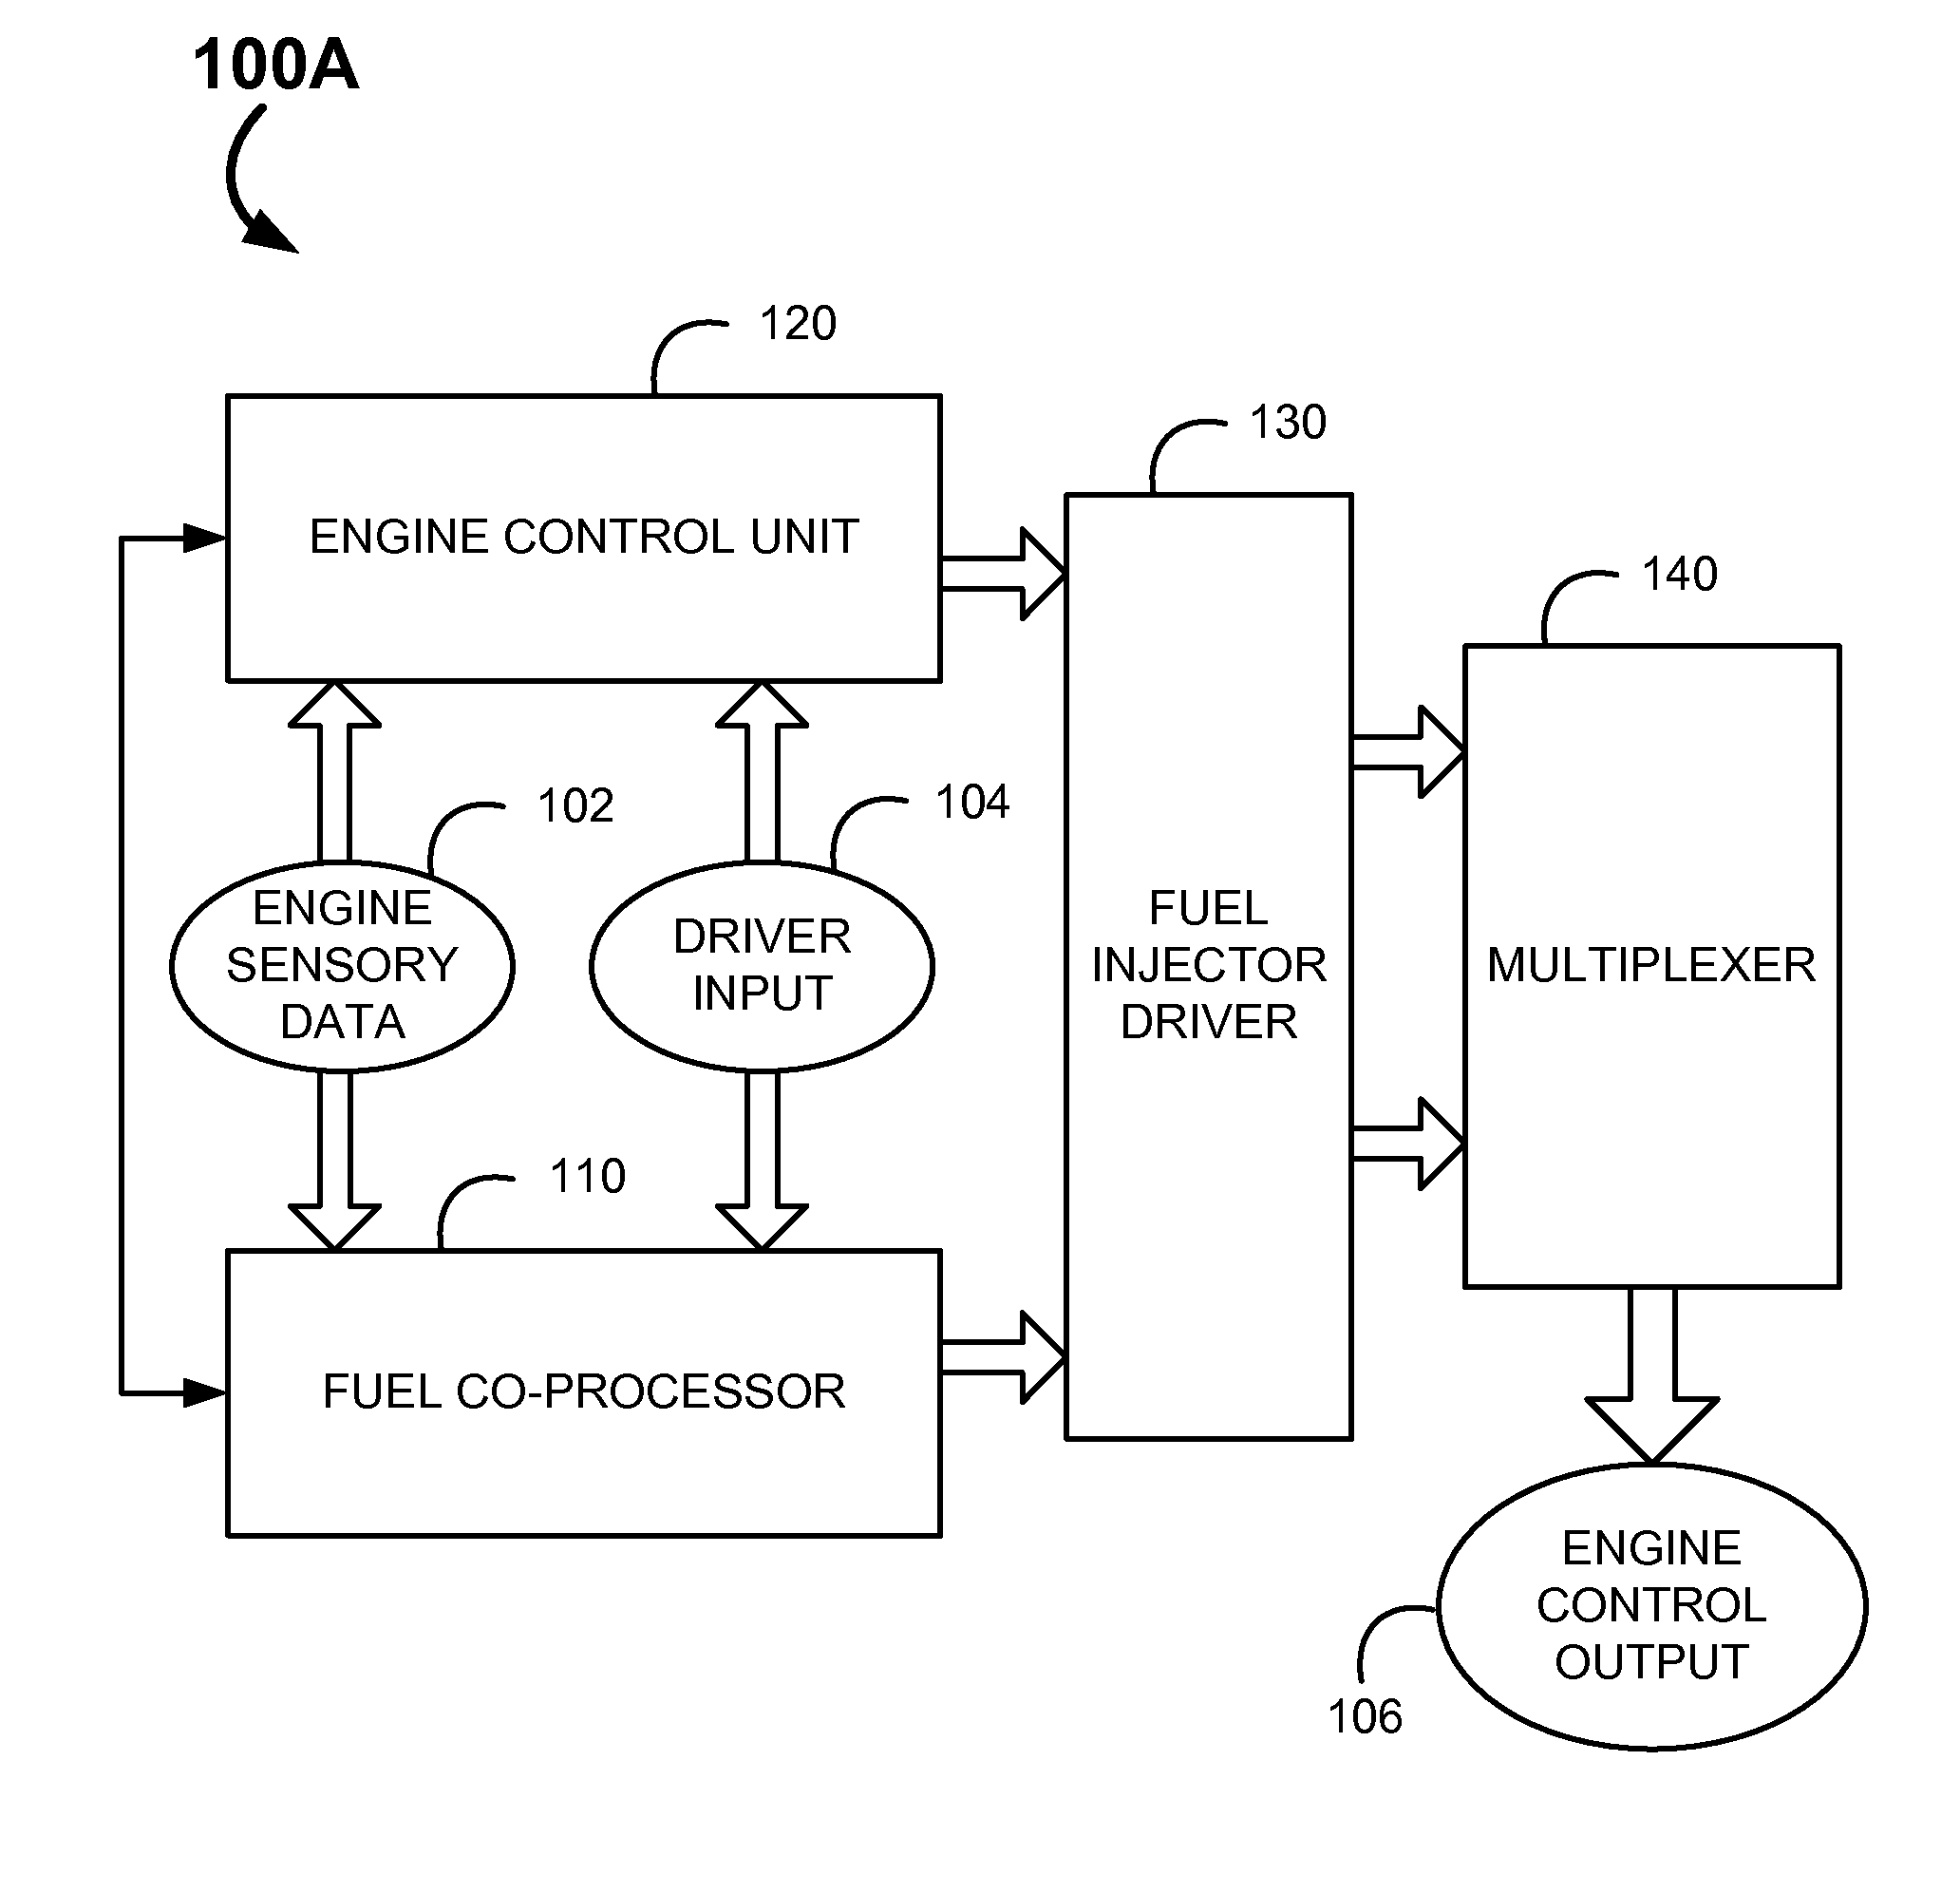 System and Methods for Improving Efficiency in Internal Combustion Engines